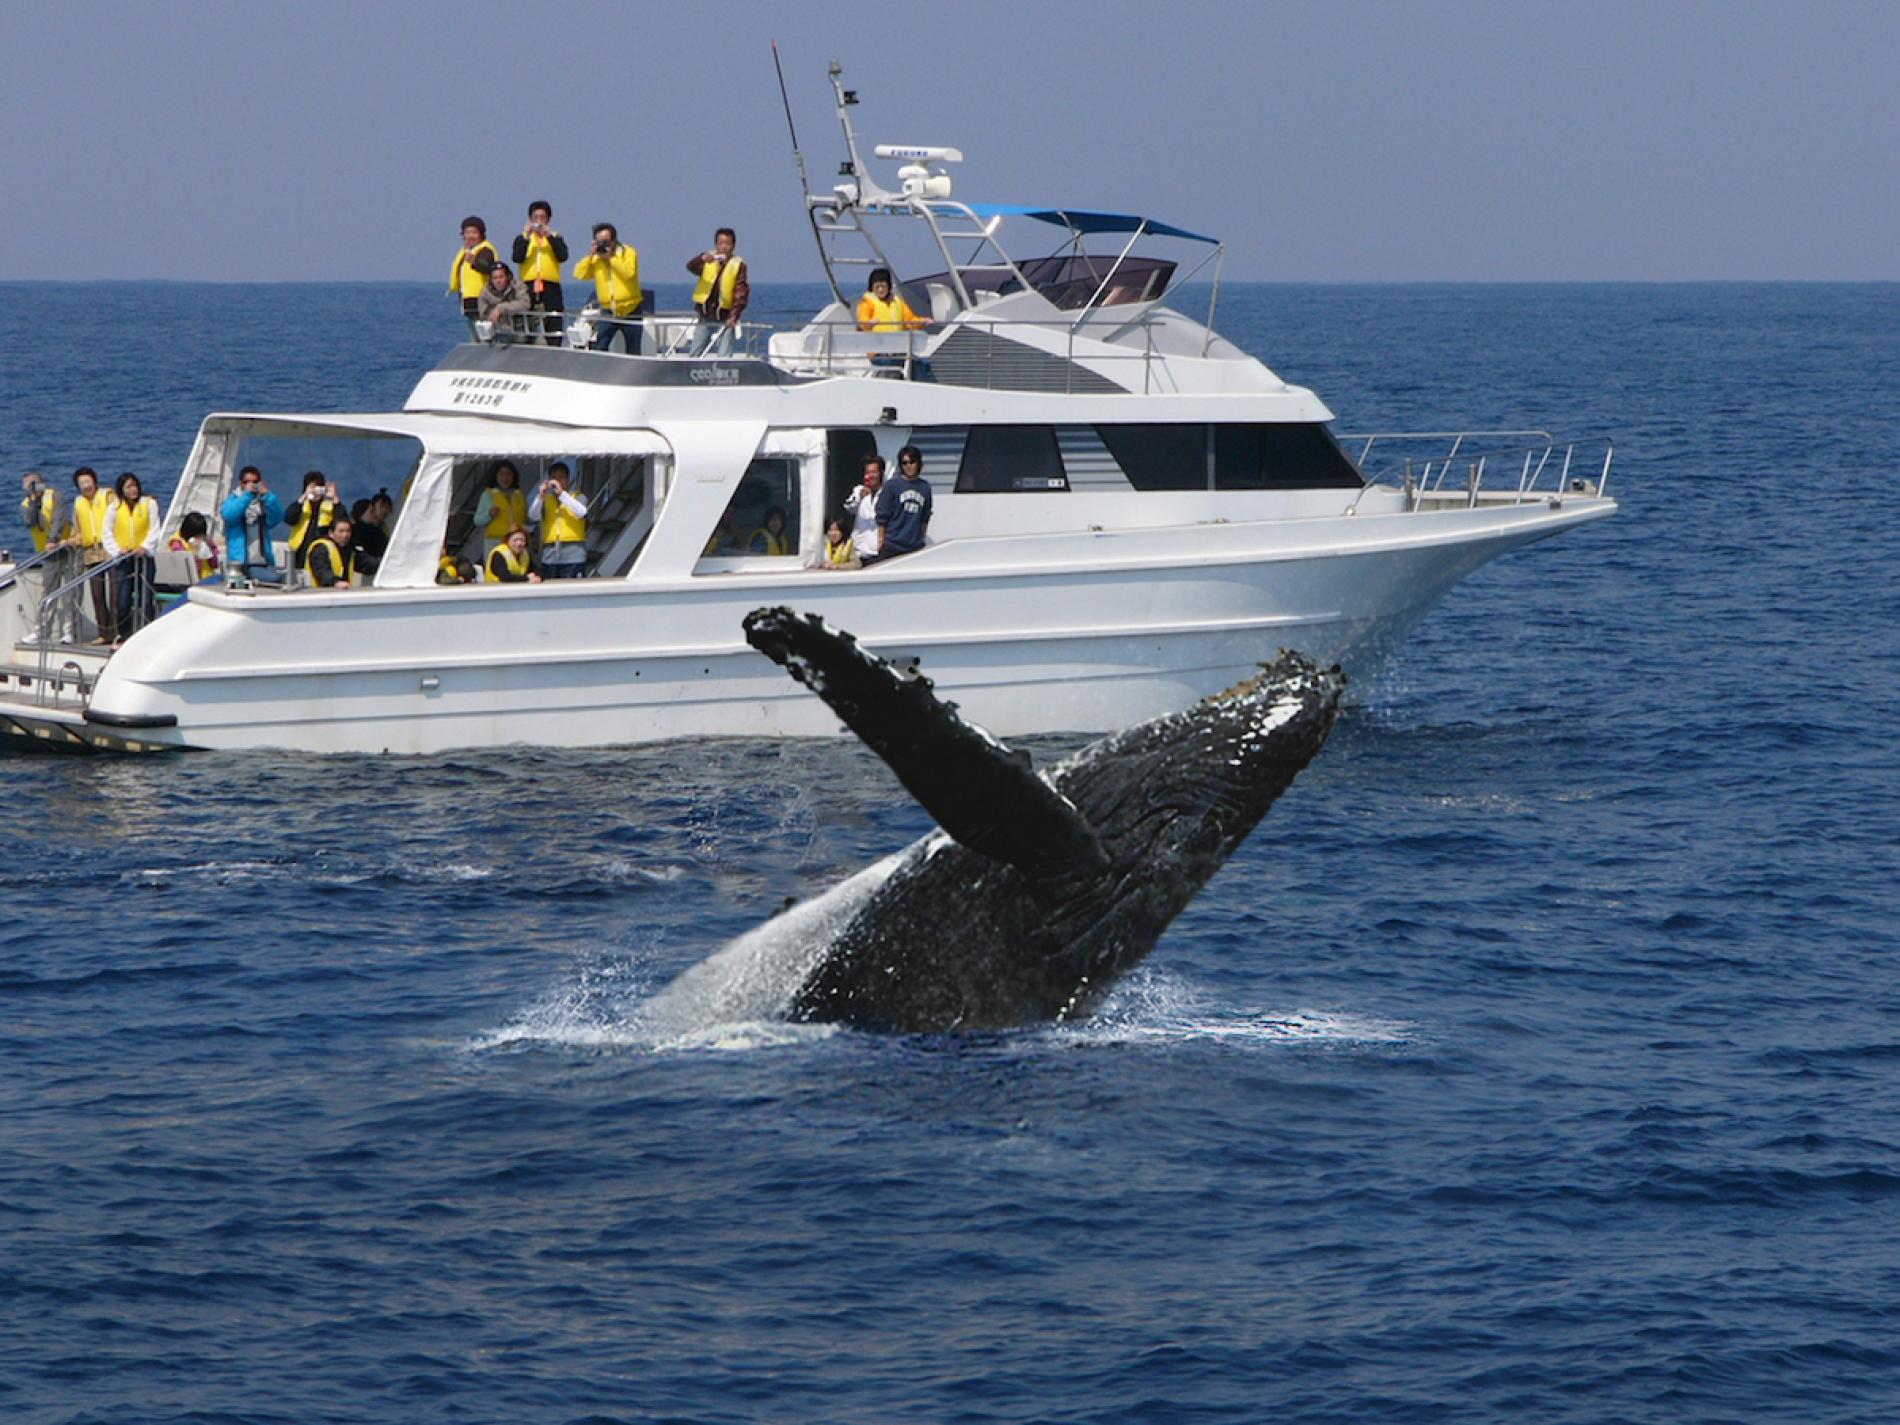 Half-Day Tour from Okinawa: Naha Whale Watching - KKday